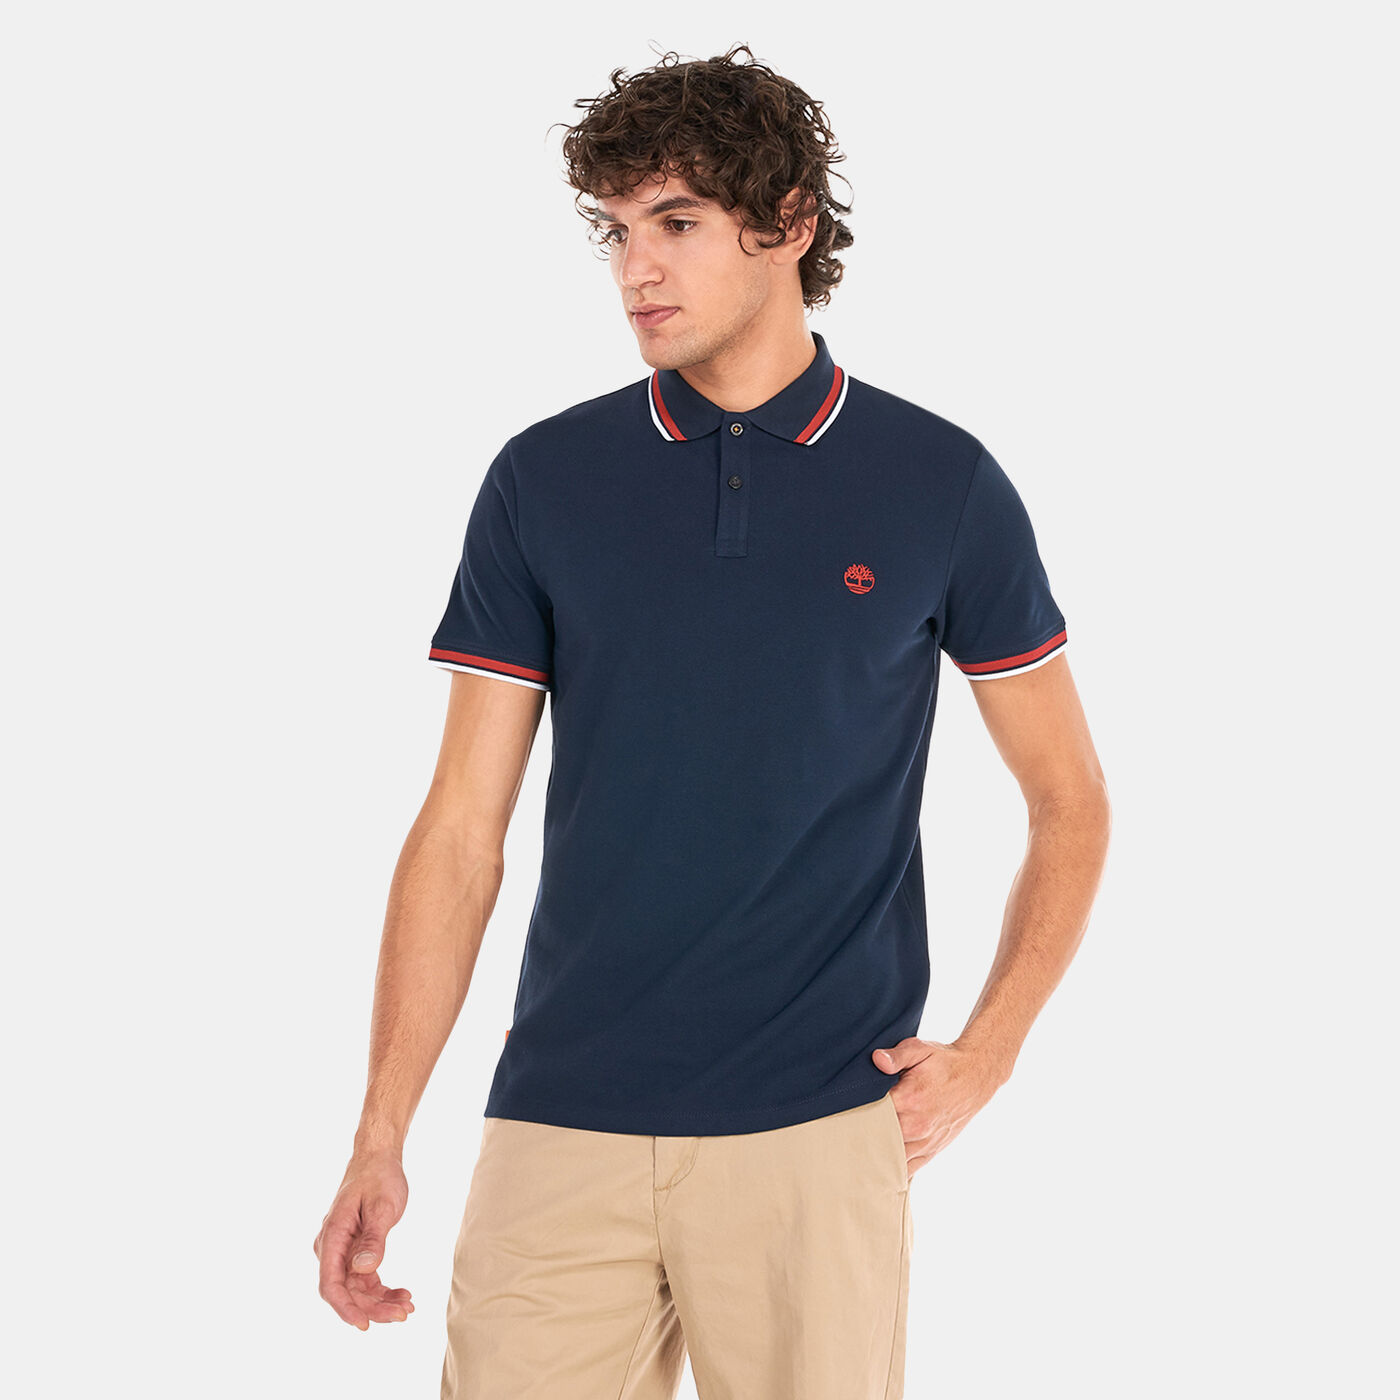 Men's Millers River Tipped Polo Shirt